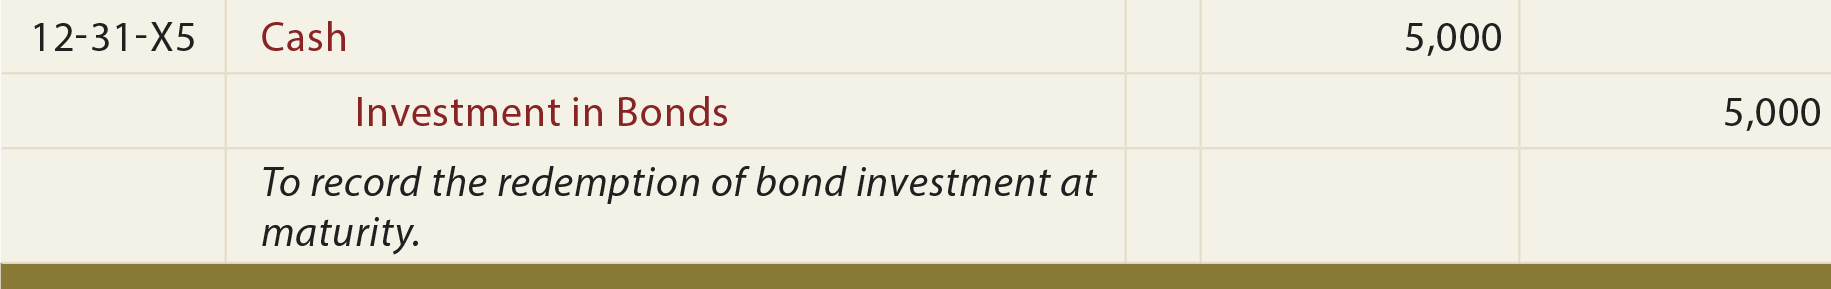 Investment in Bonds at a Discount General Journal Entry - To record the redemption of bond investment at maturity